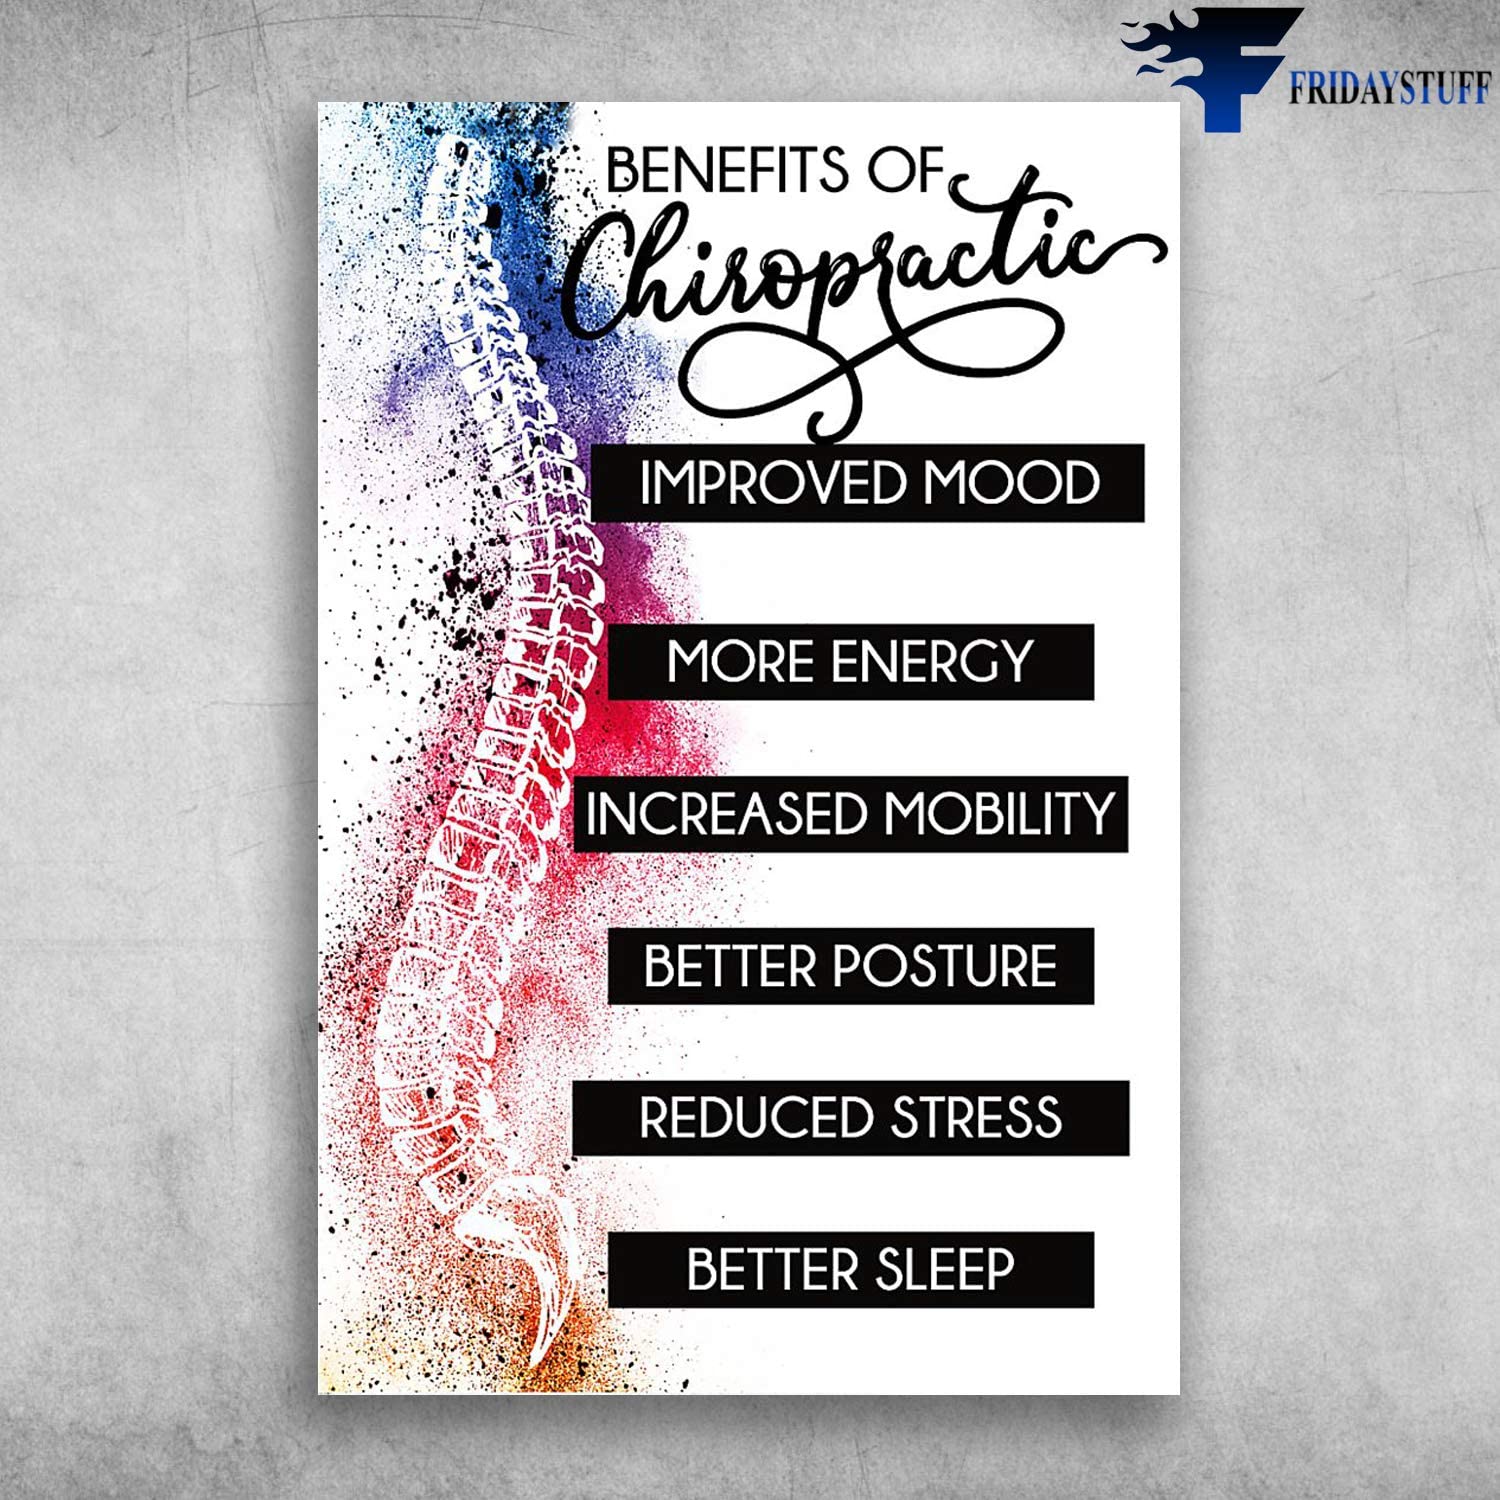 Benefits Of Chiropractic Improved Mood More Energy Better Posture